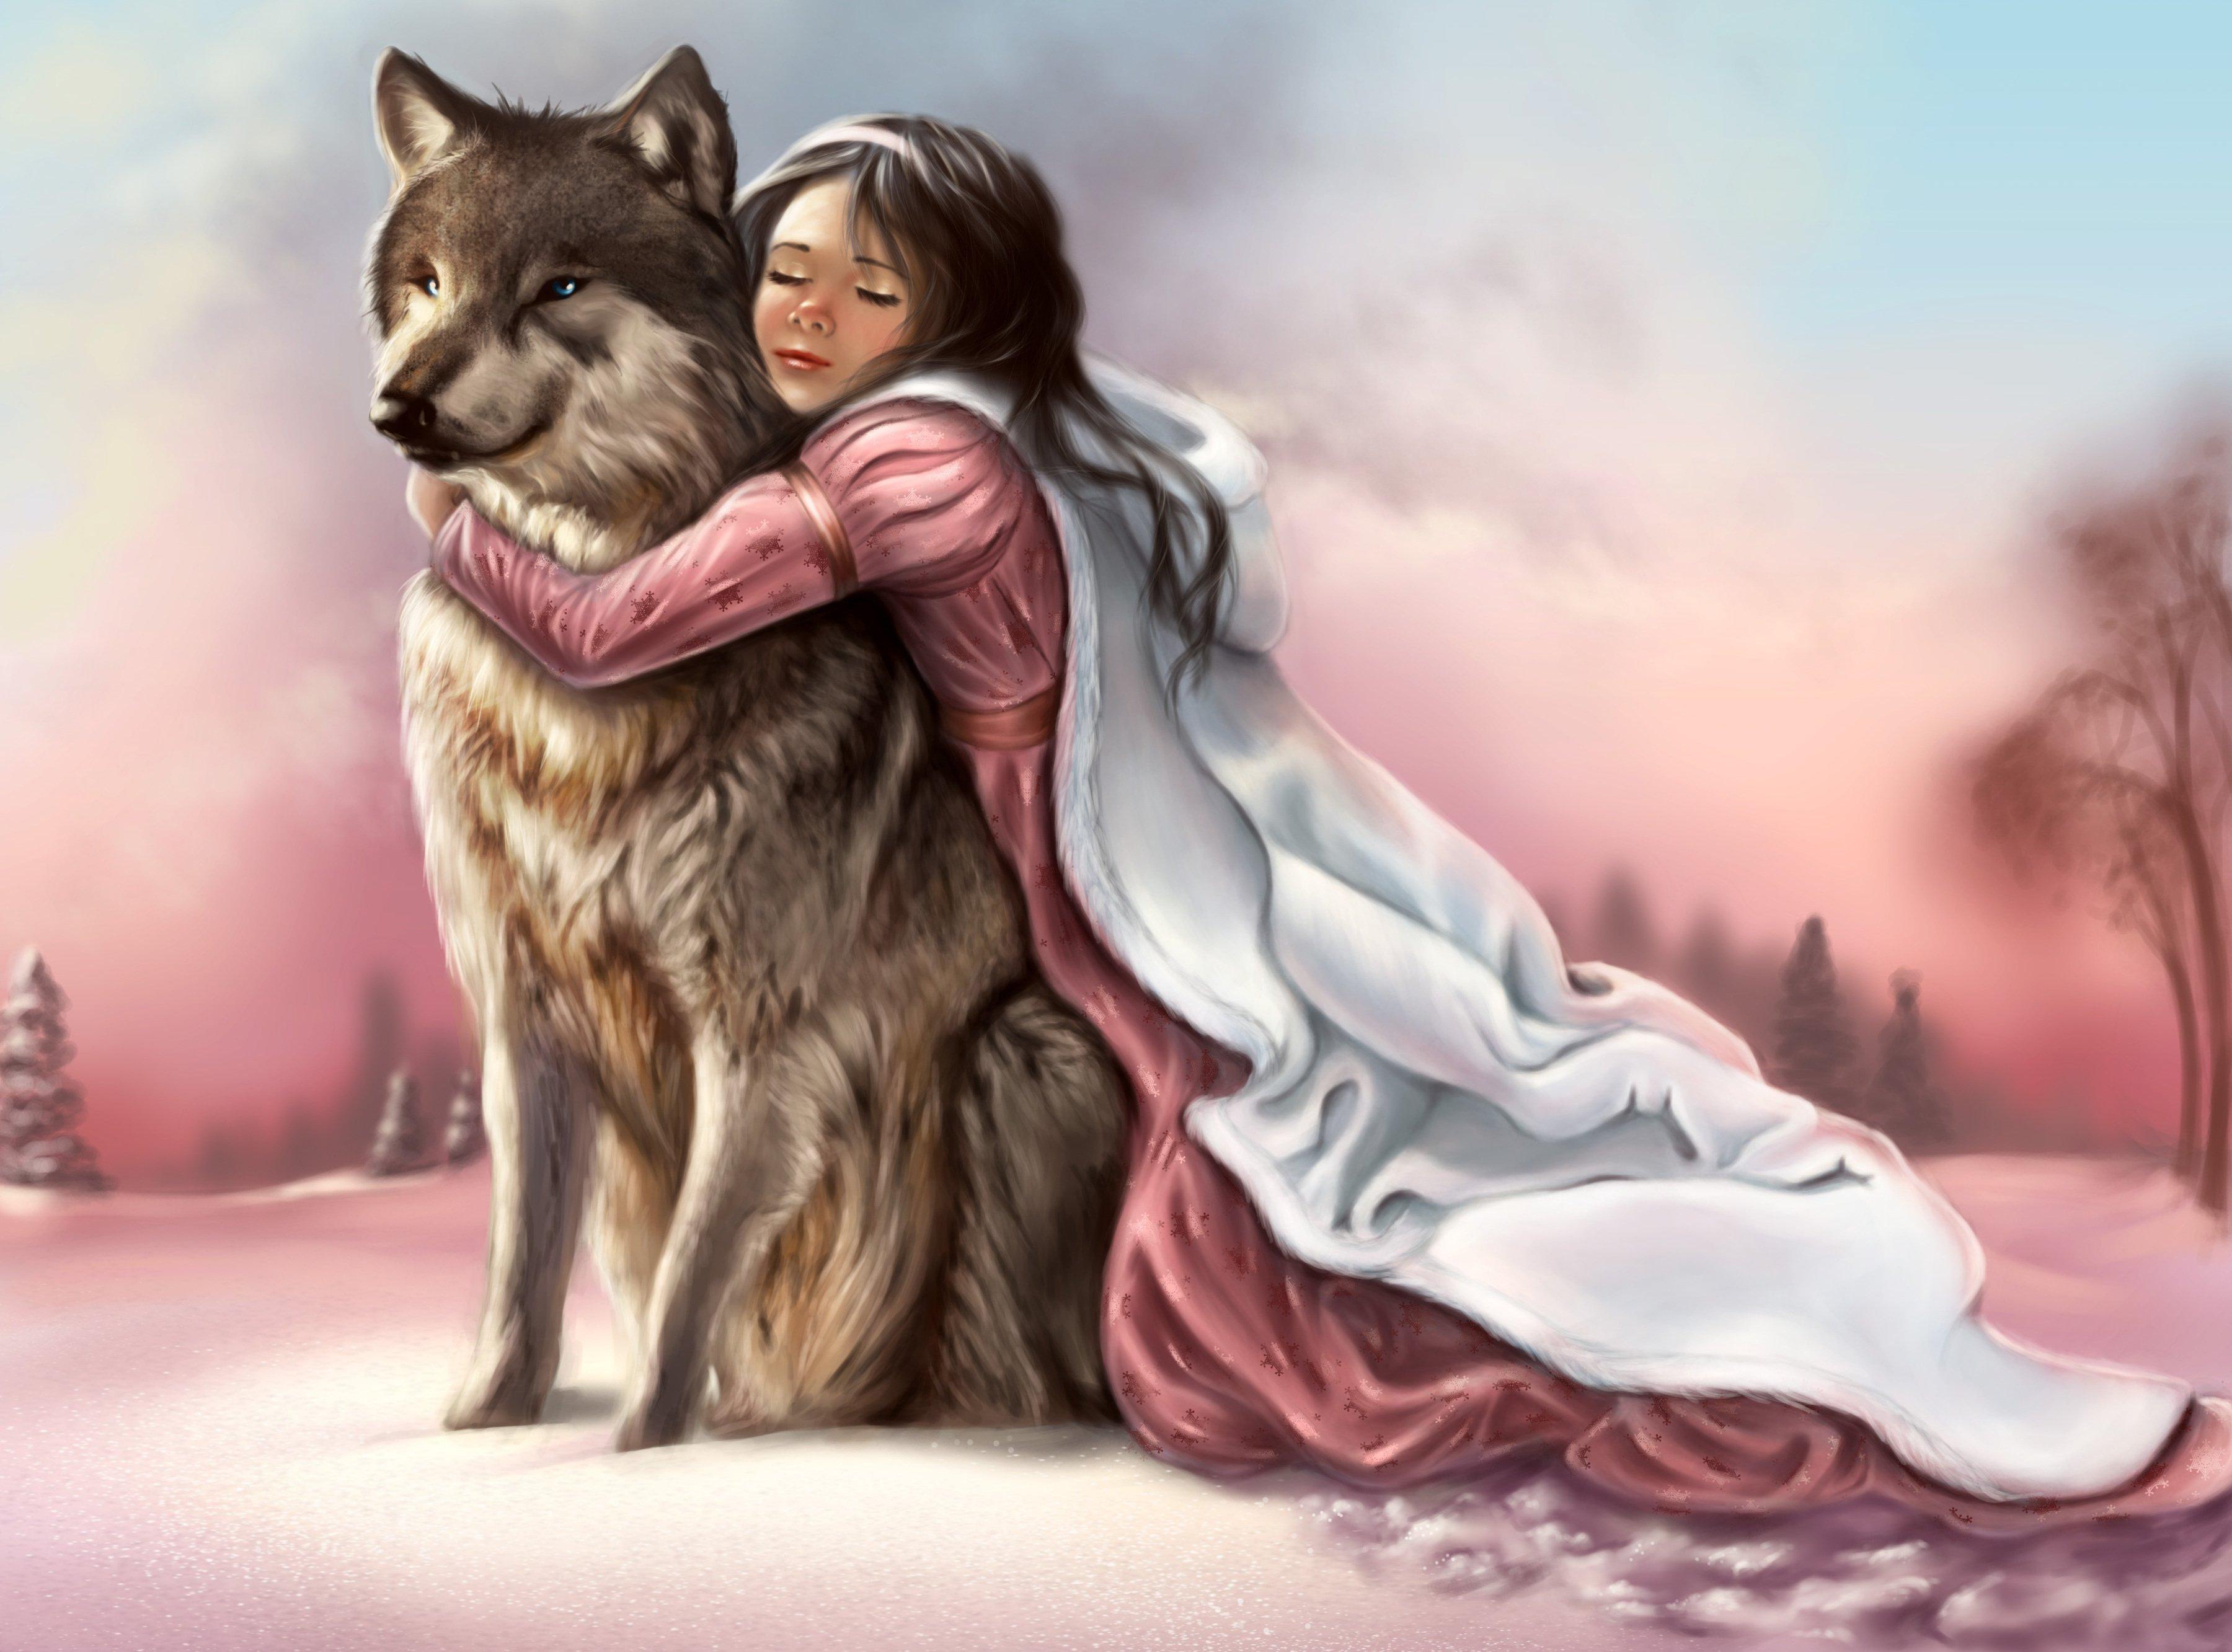 Painting fantasy girl pink dress face eyes closed hands hugging wolf